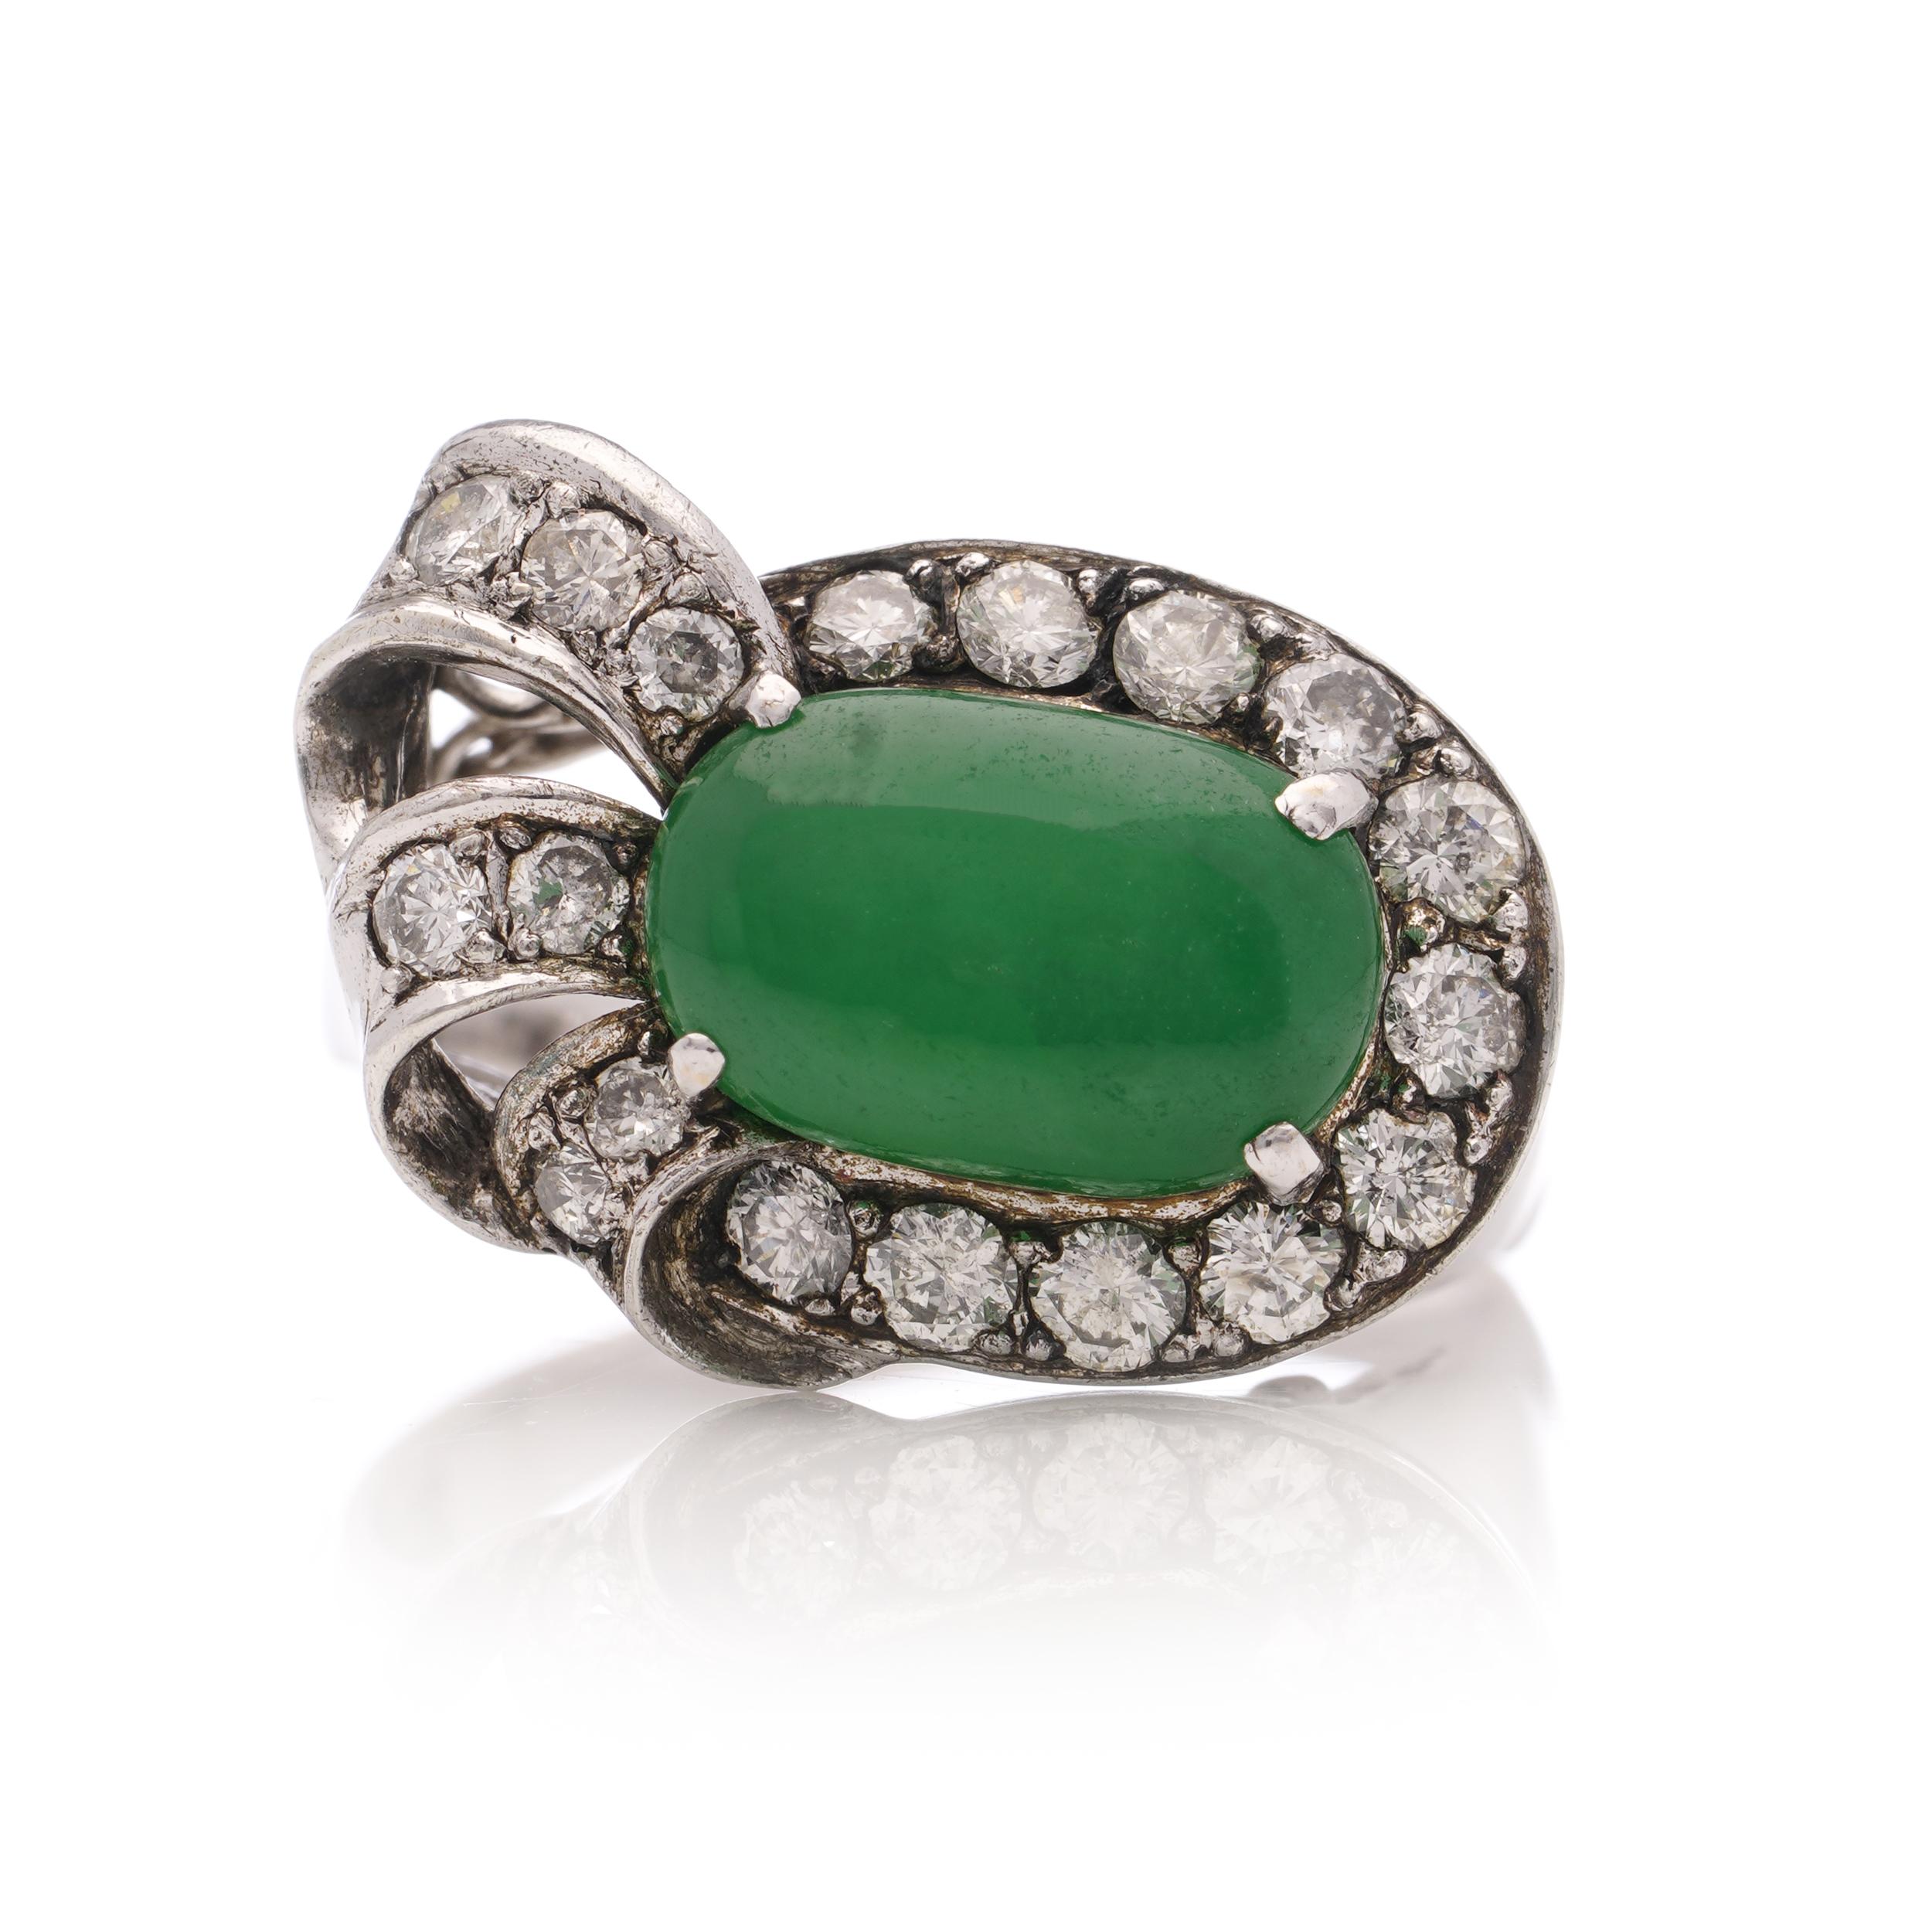 Vintage 18kt. white gold natural Colombian emerald and diamond ring. 

Made China, Circa 1980 - 1990's 
Hallmarked with Chinese marks and 18kt. gold mark. 

Dimensions -
Finger Size (UK) = M 1/2 (EU) = 54.5 (US) = 6.5
Weight: 5.00 grams
Ring Size: